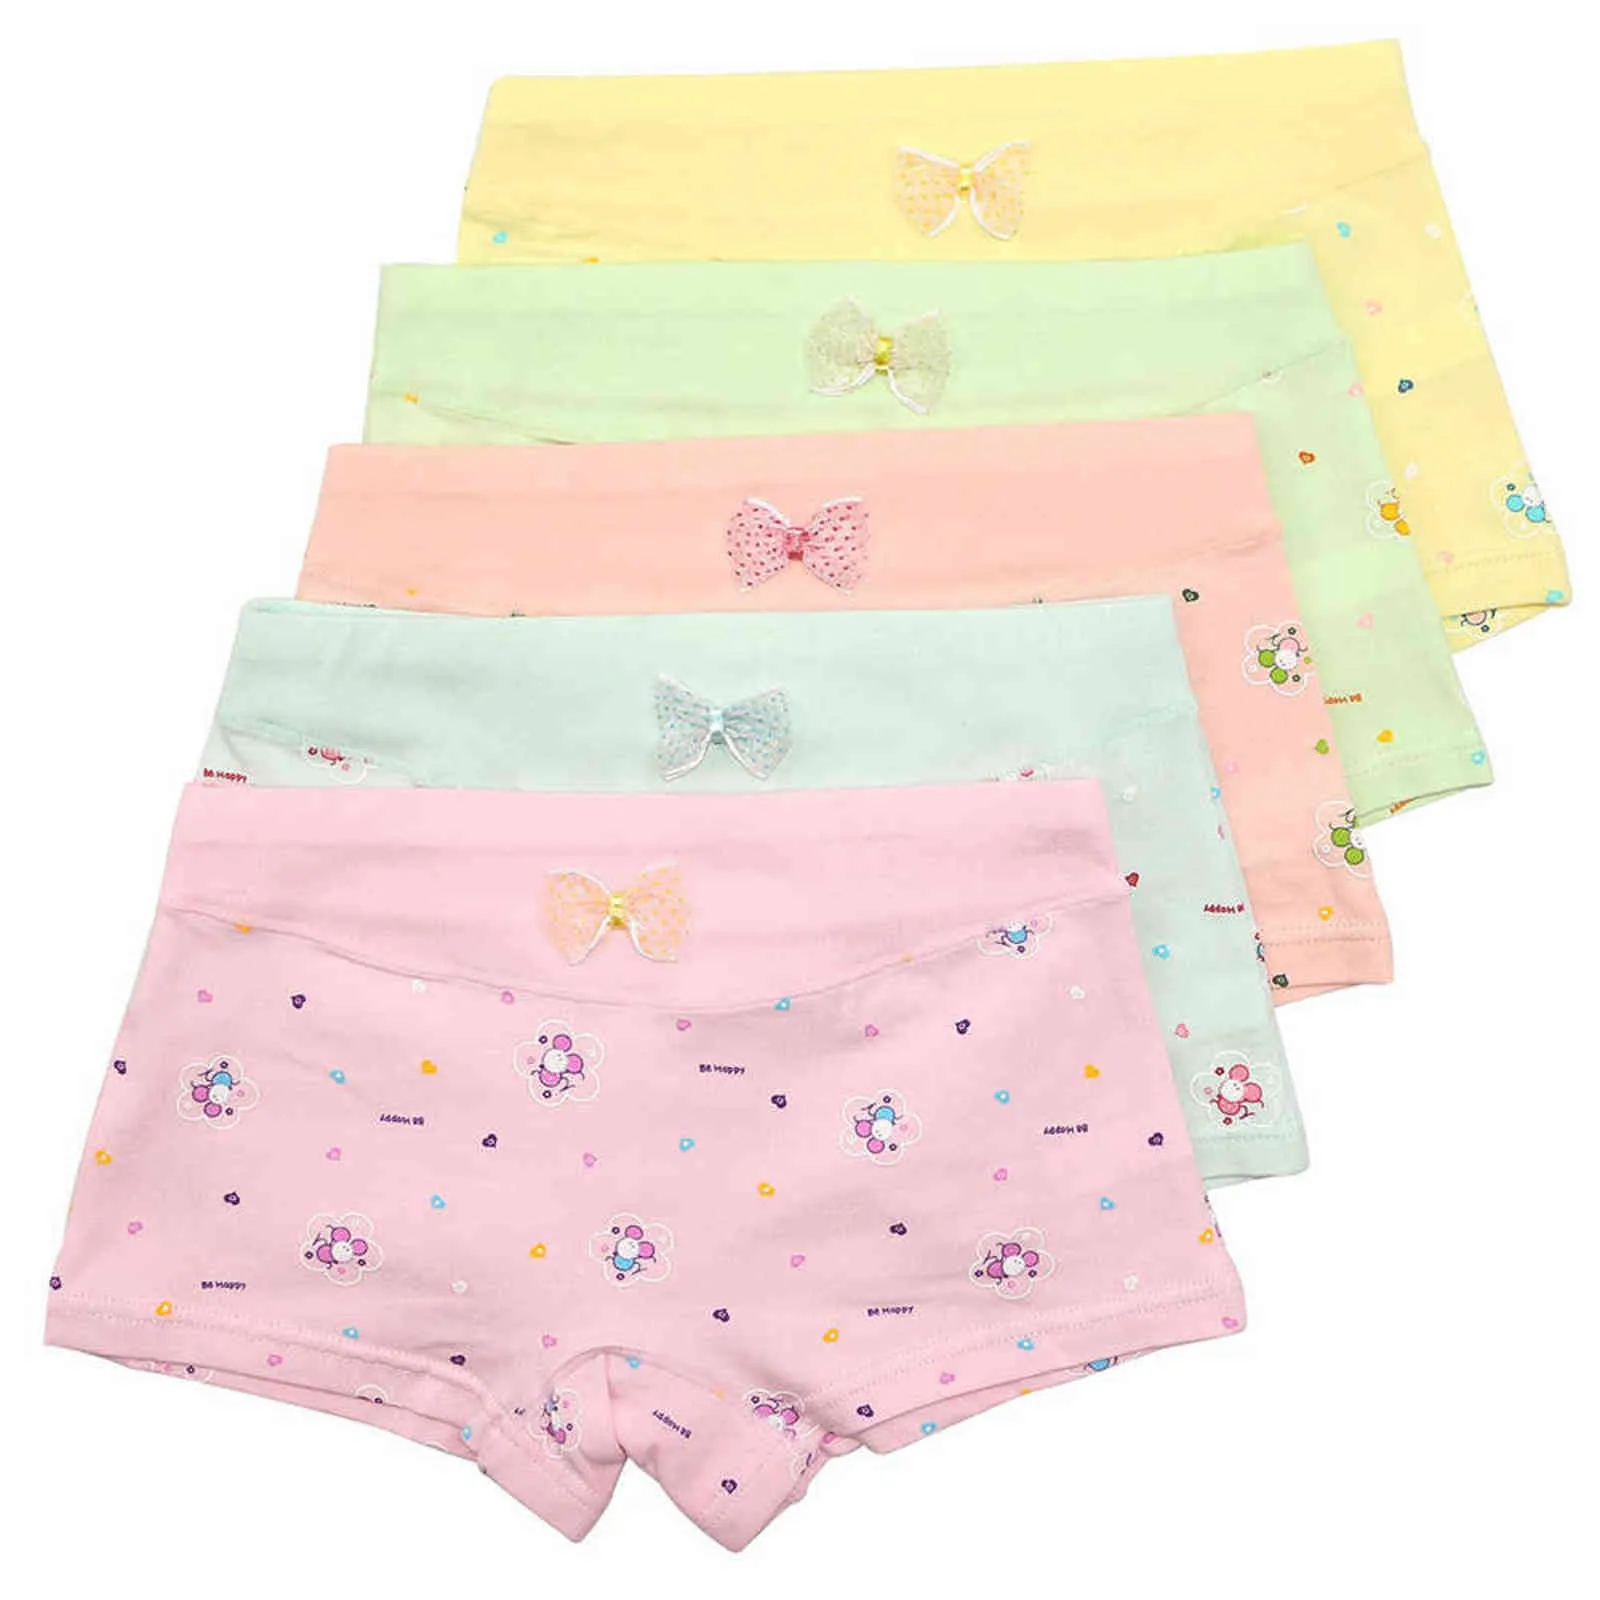 5 Pack Girls Boxer Briefs Set Cotton Organic Cotton Panties For Toddlers,  Little Hipsters, And Boys Sizes 2 12 Years From Kong06, $10.8